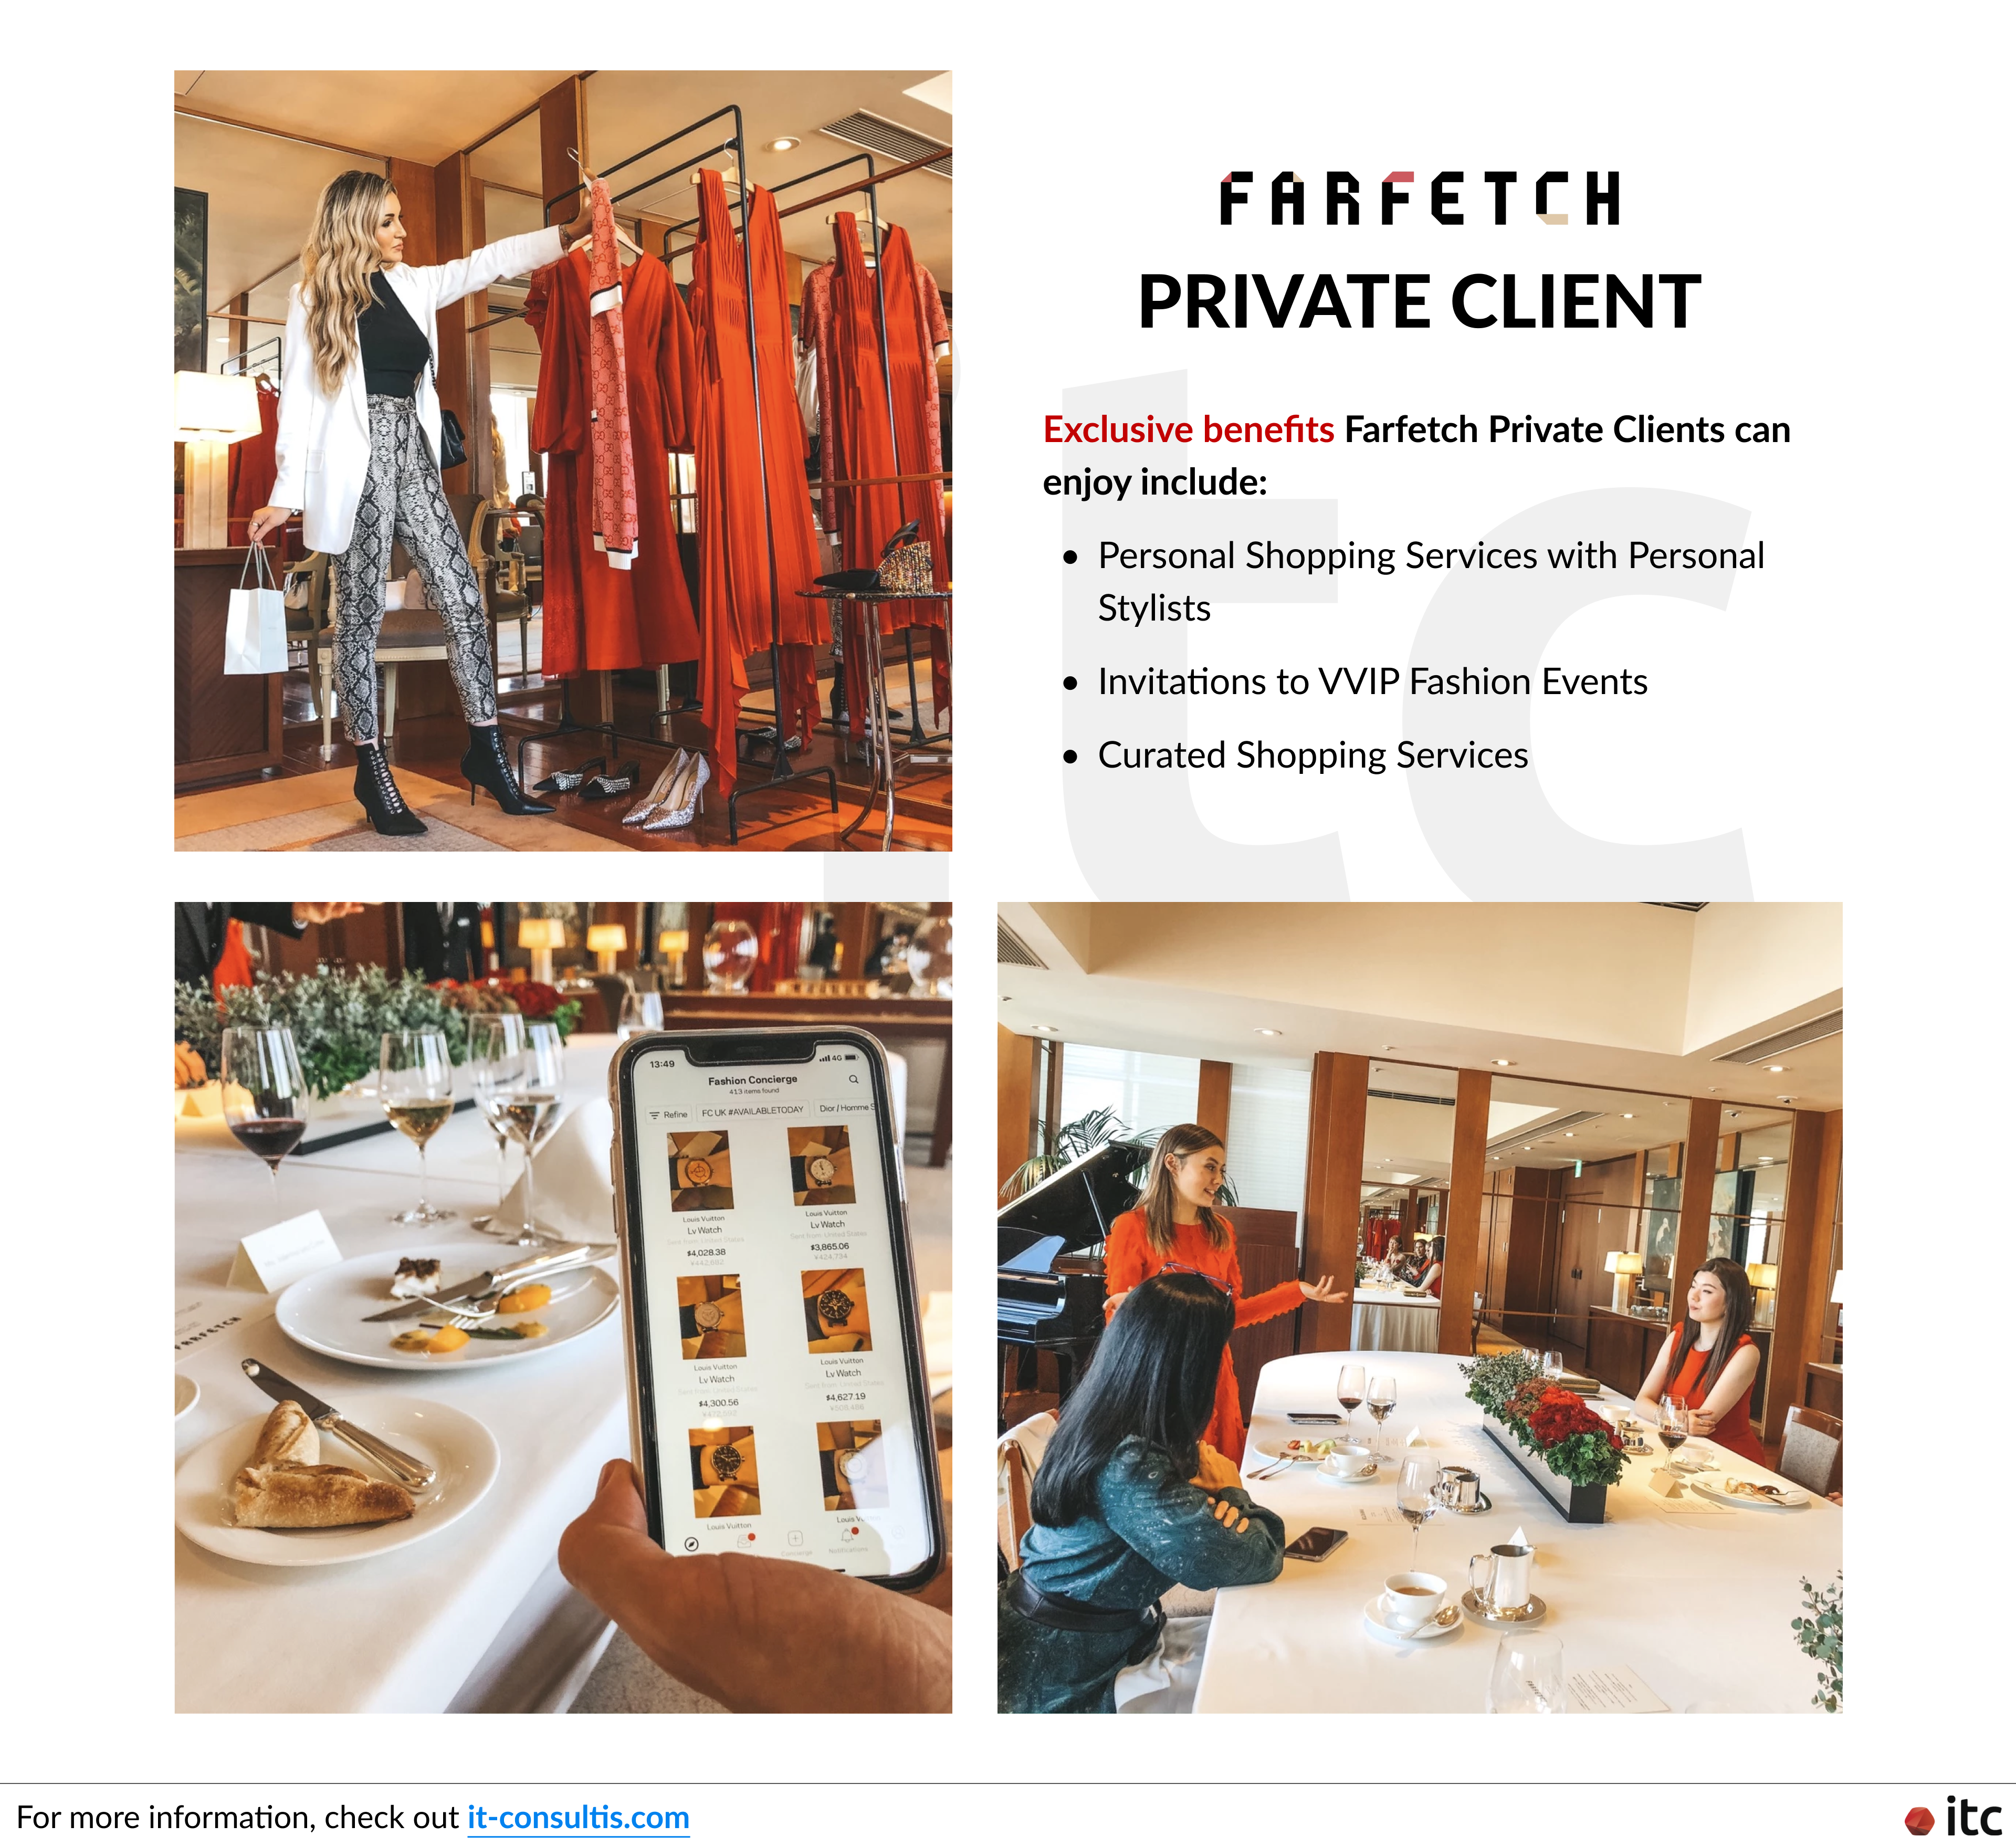 Farfetch Private Client can enjoy exclusive benefits including Personal Stylists, VIP events invitation, and Fashion Concierge - curated shopping services